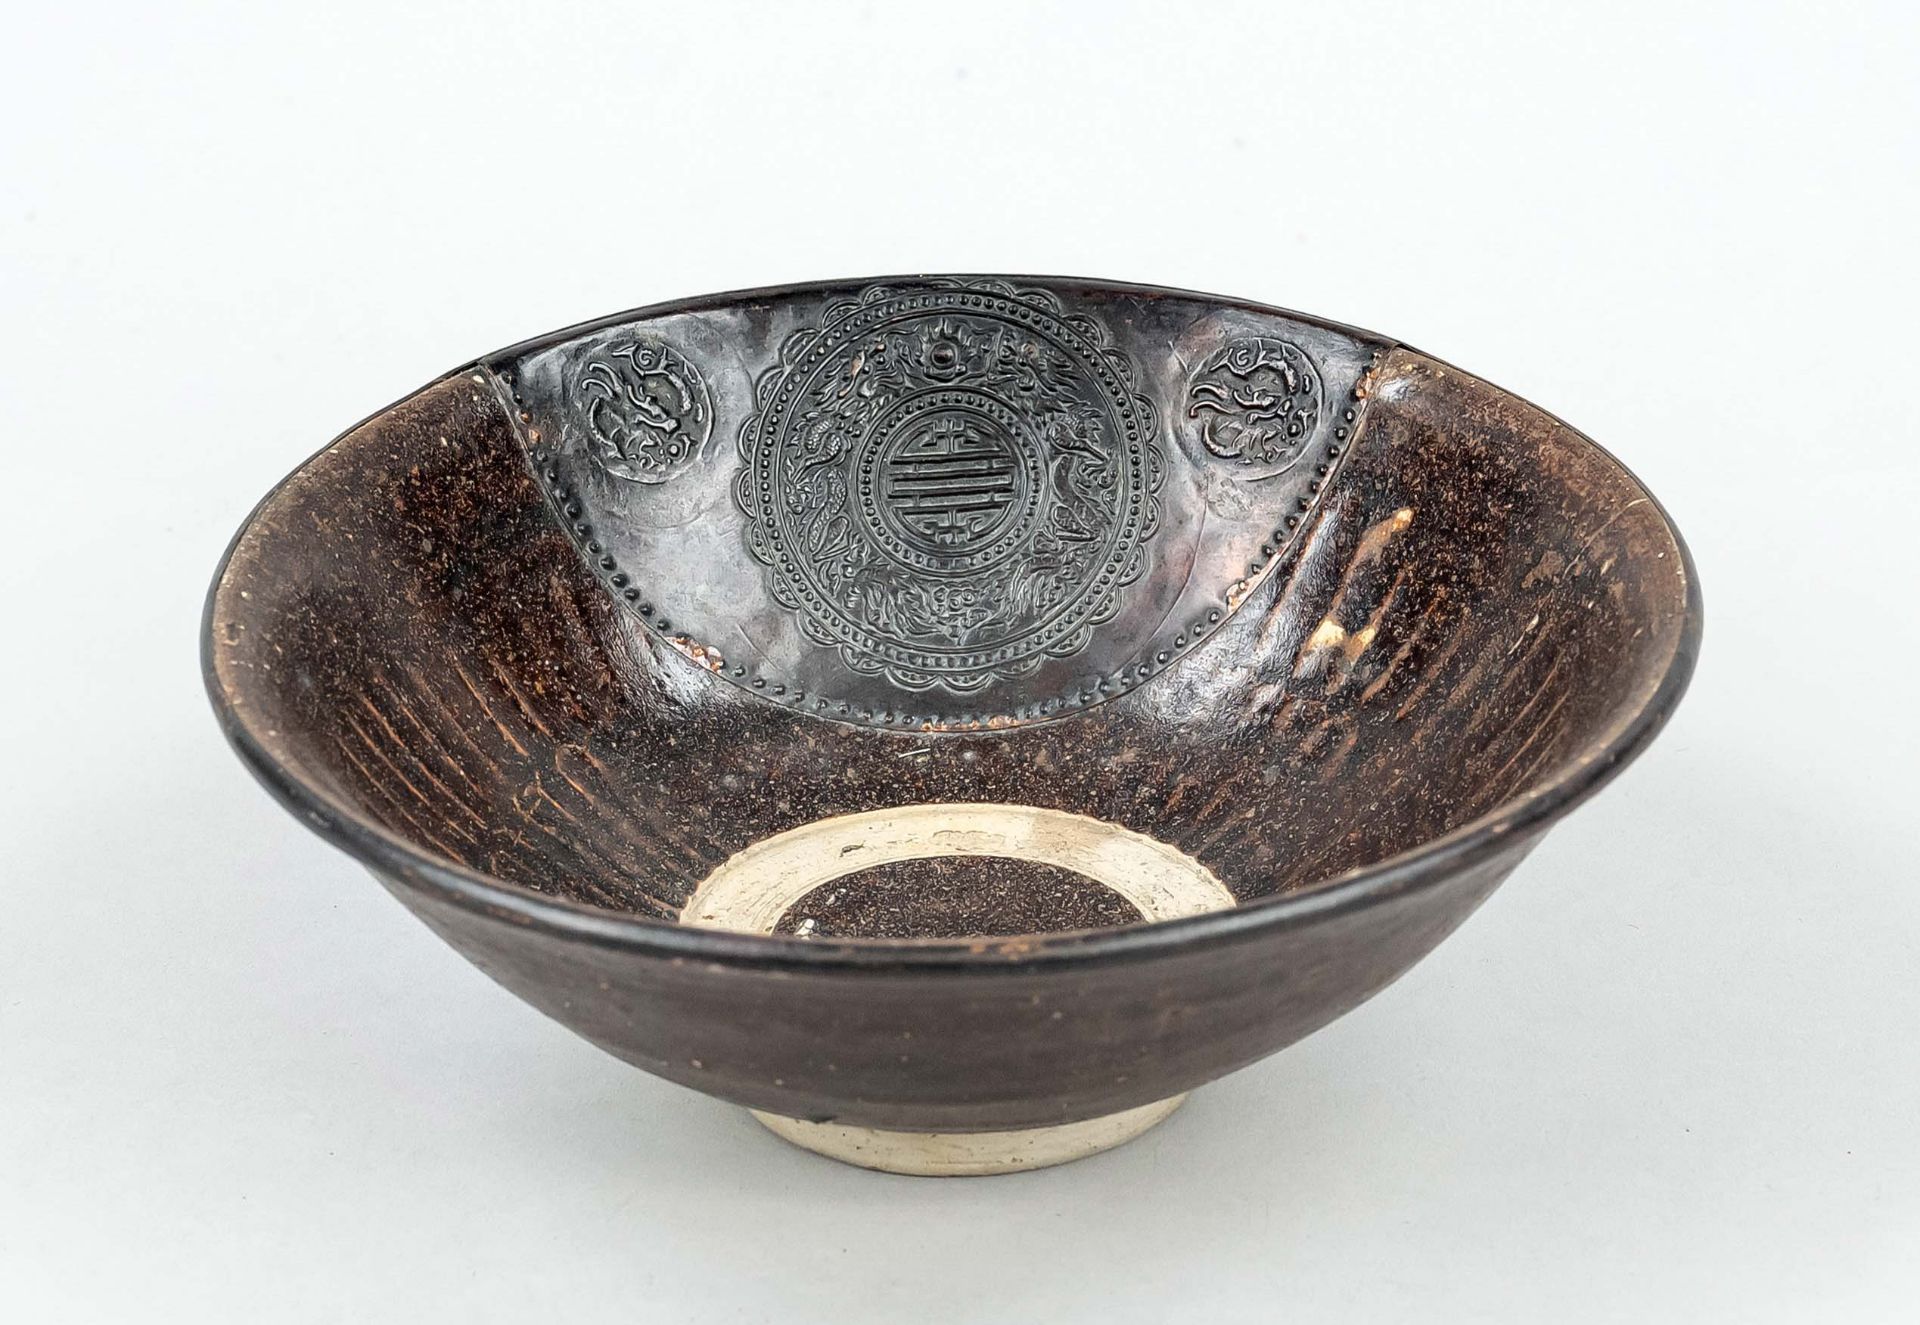 Rare brown glazed bowl with historic repair, China, Qing dynasty(1644-1911), 18th c. stoneware